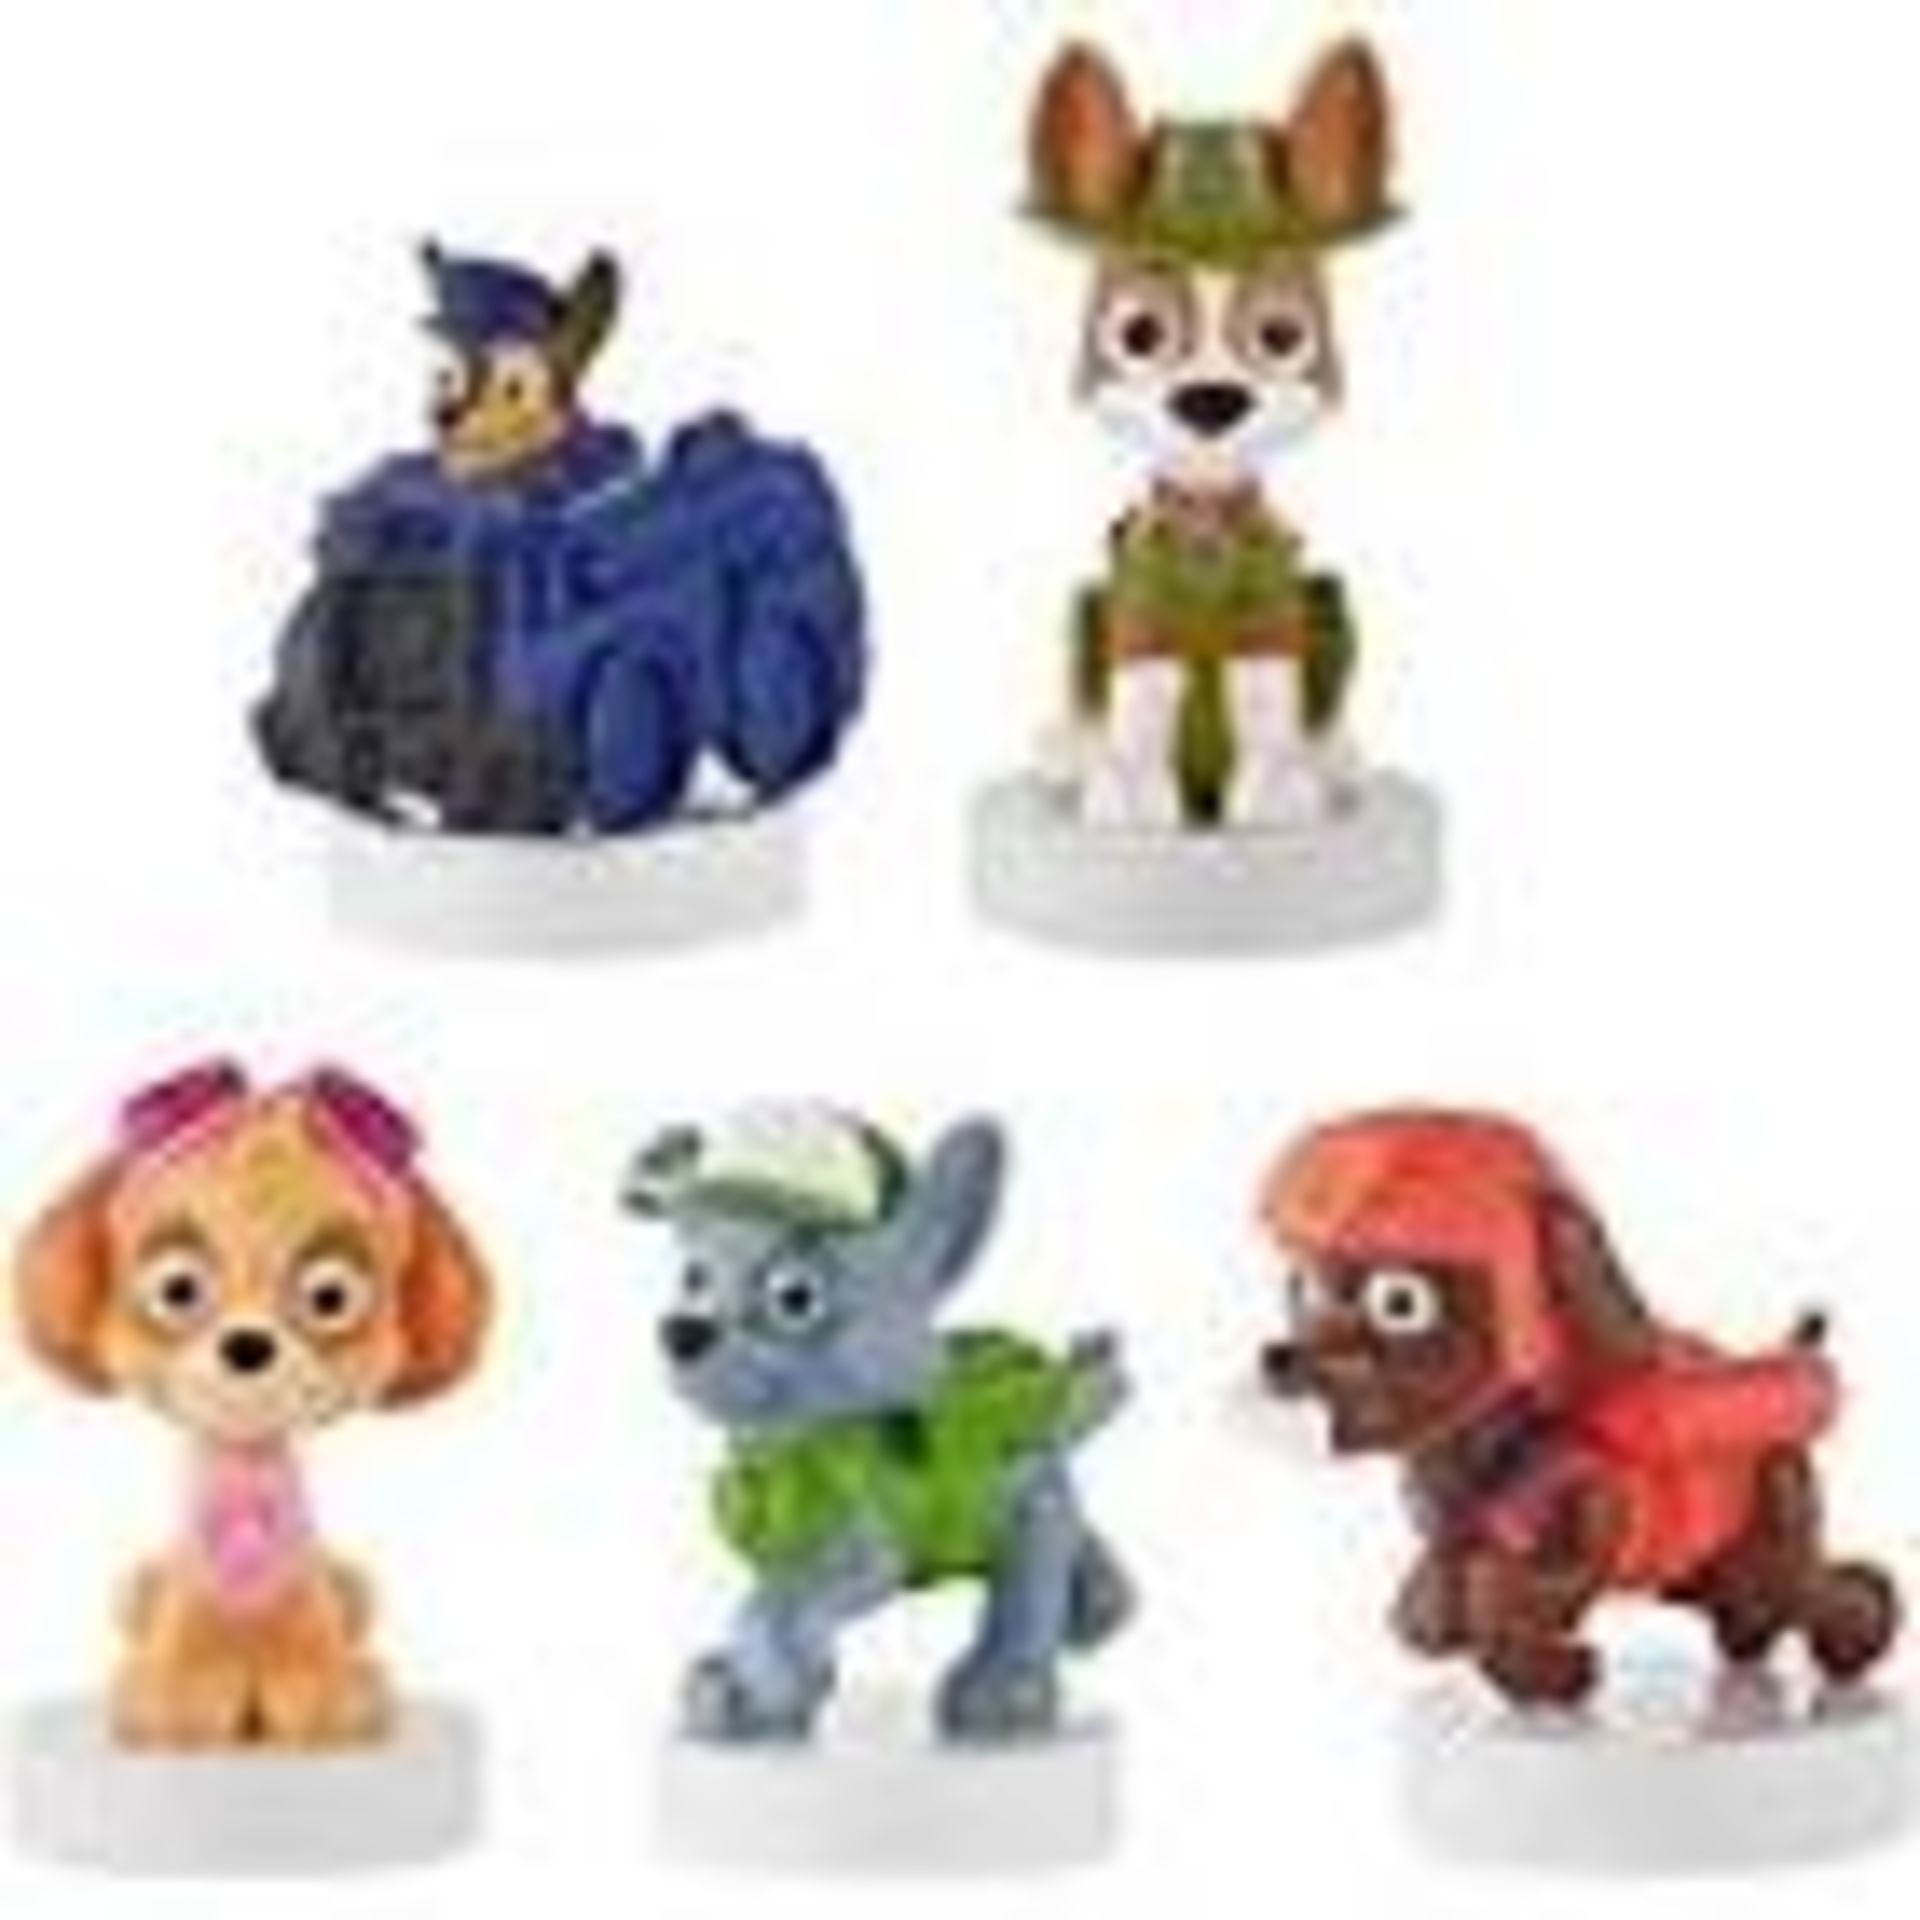 500 x Paw Patrol Toppers/Stamper Sets - Image 4 of 6